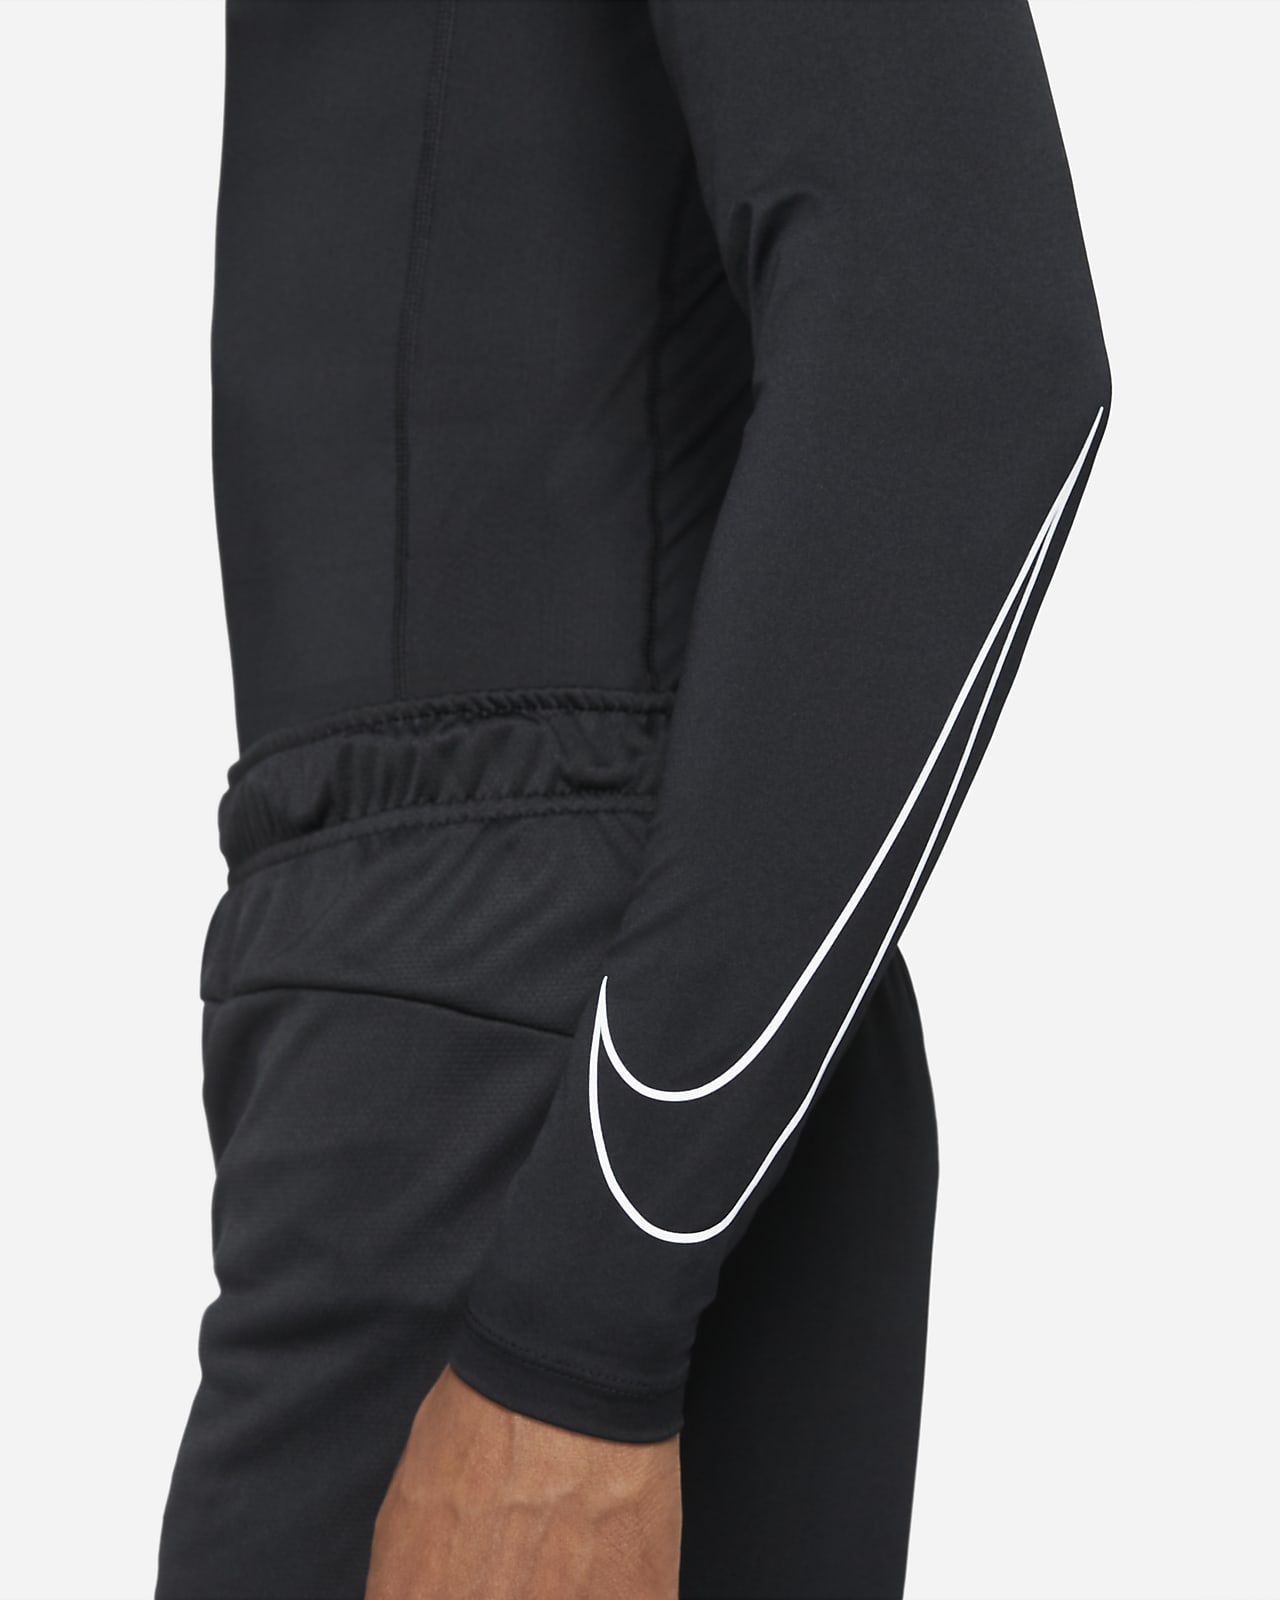 Injection Wafer Hold Nike Pro Dri-FIT Men's Tight-Fit Long-Sleeve Top. Nike LU